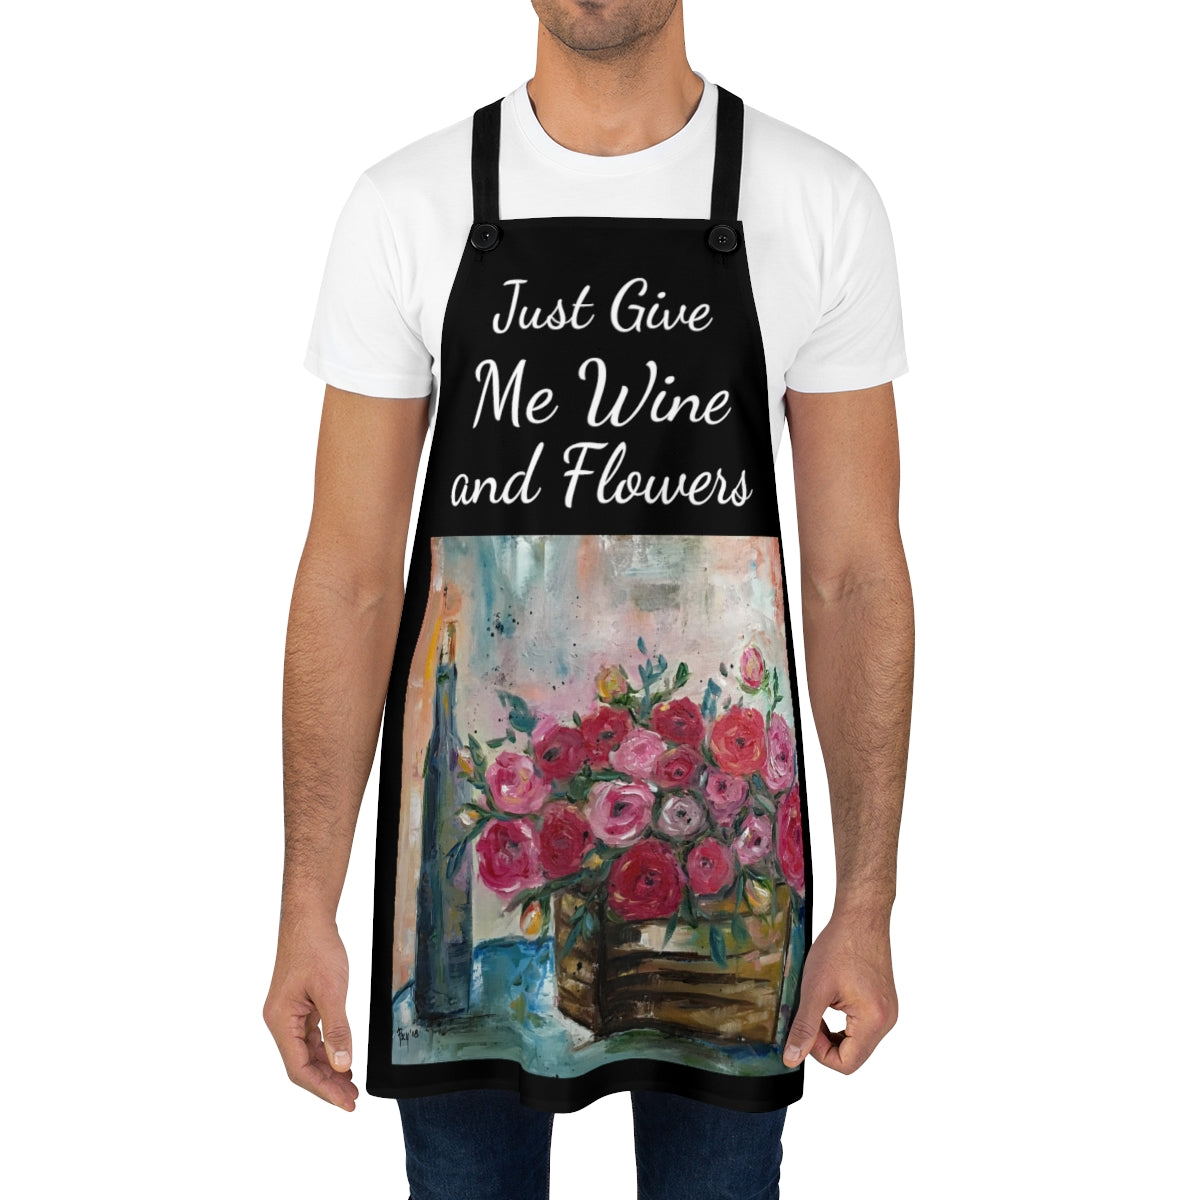 Just Give Me Wine and Flowers  Black Kitchen Apron